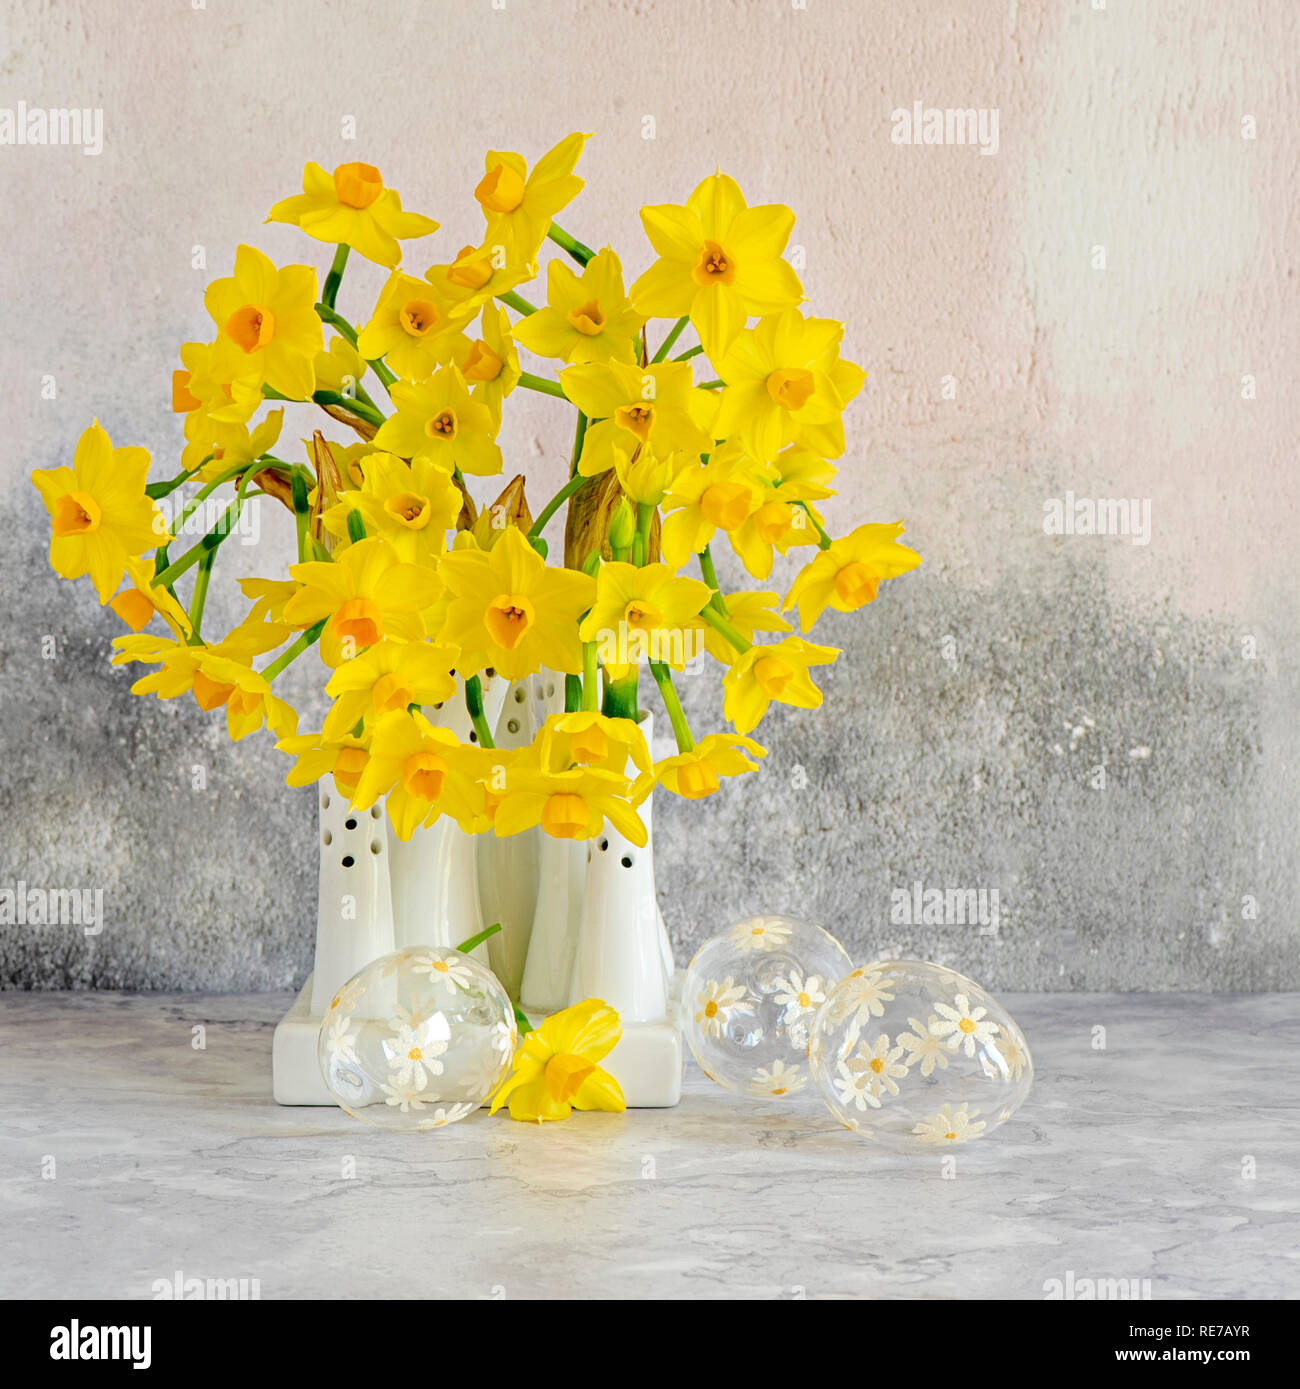 Beautiful spring, yellow Narcissus 'Tête-à-tête' - Daffodils arranged in white porcelain vases Stock Photo